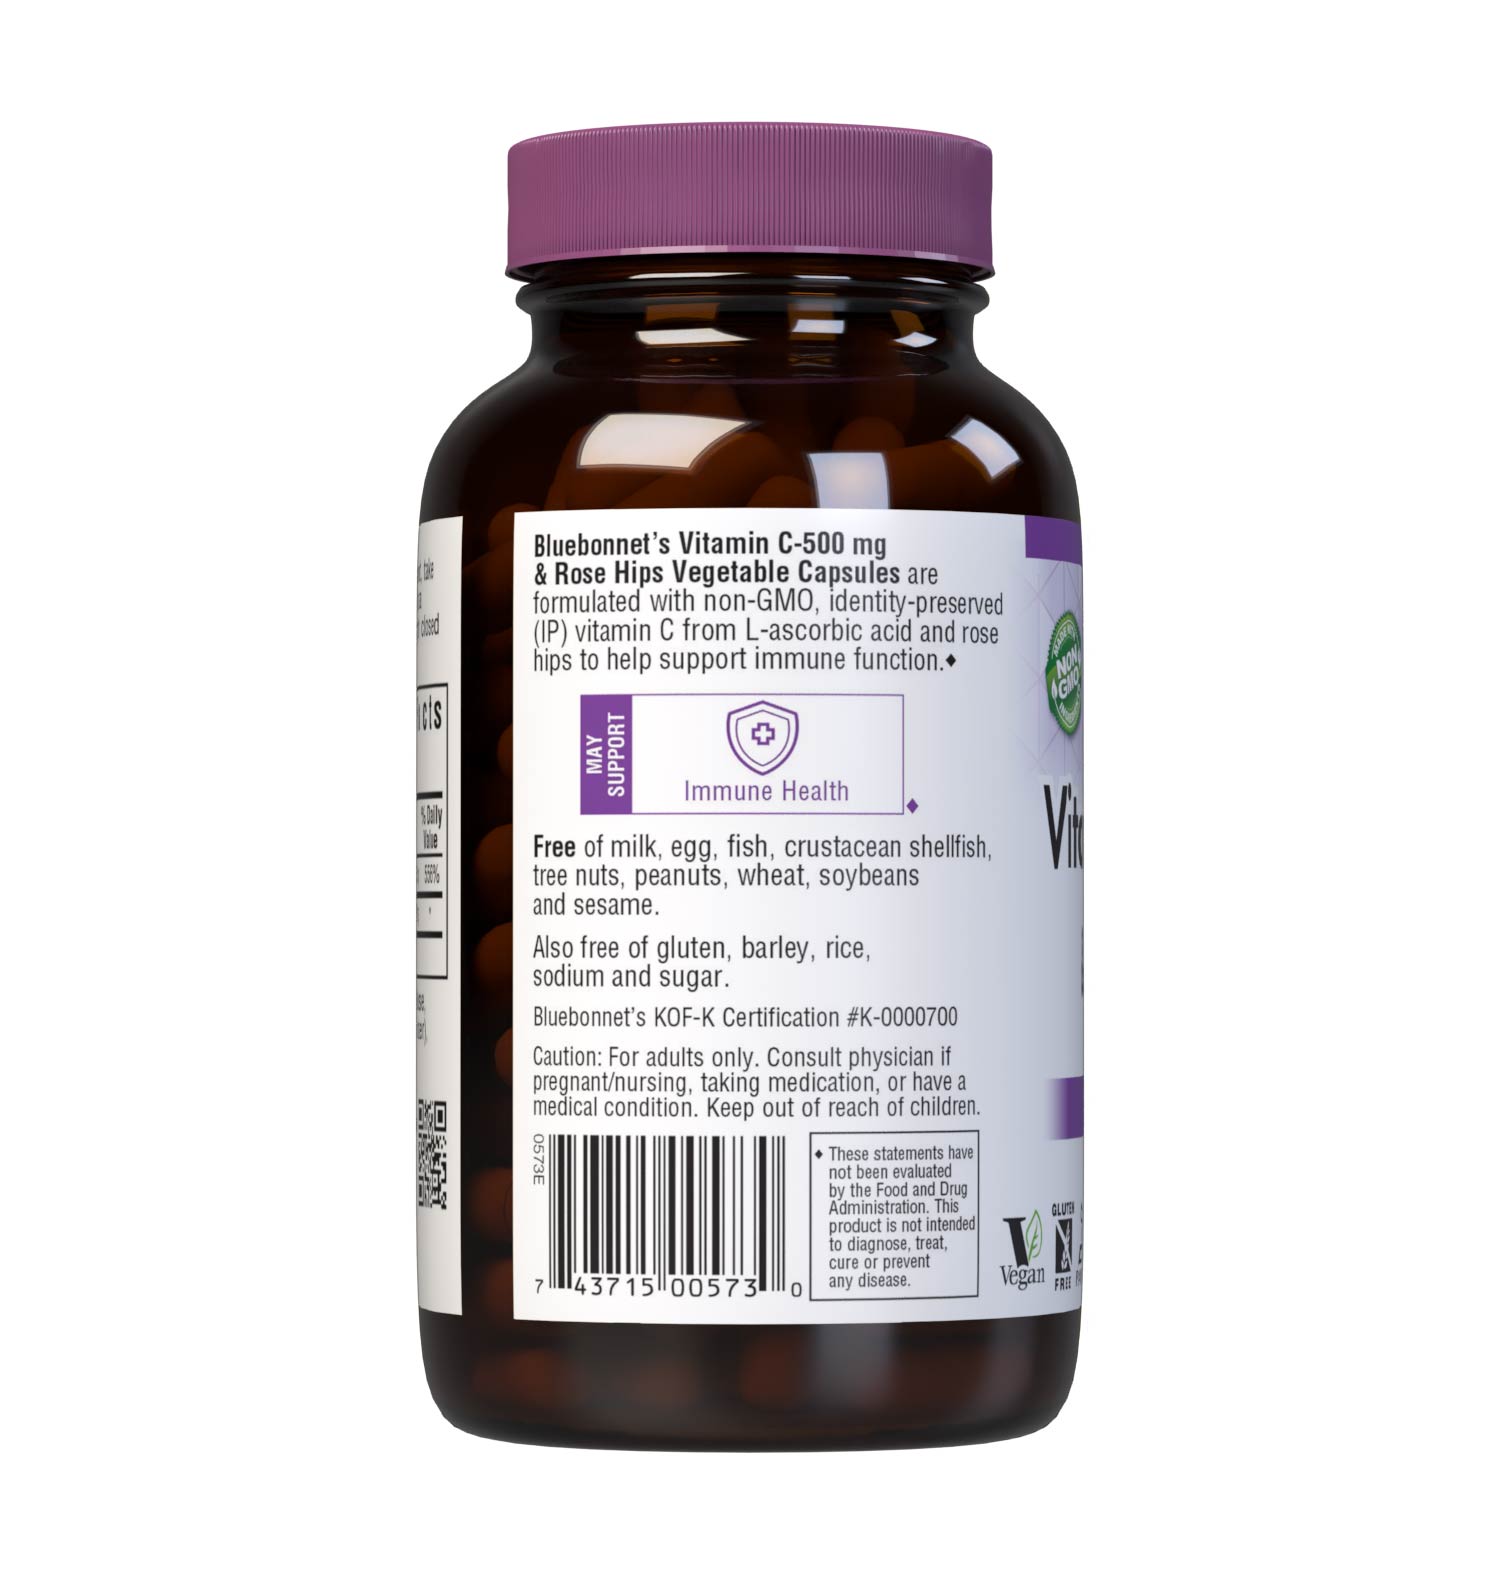 Bluebonnet’s Vitamin C-500 mg & Rose Hips 180 Vegetable Capsules are formulated with non-GMO, identity preserved (IP) vitamin C from L-ascorbic acid and rose hips to help support immune function. Description panel. #size_180 count